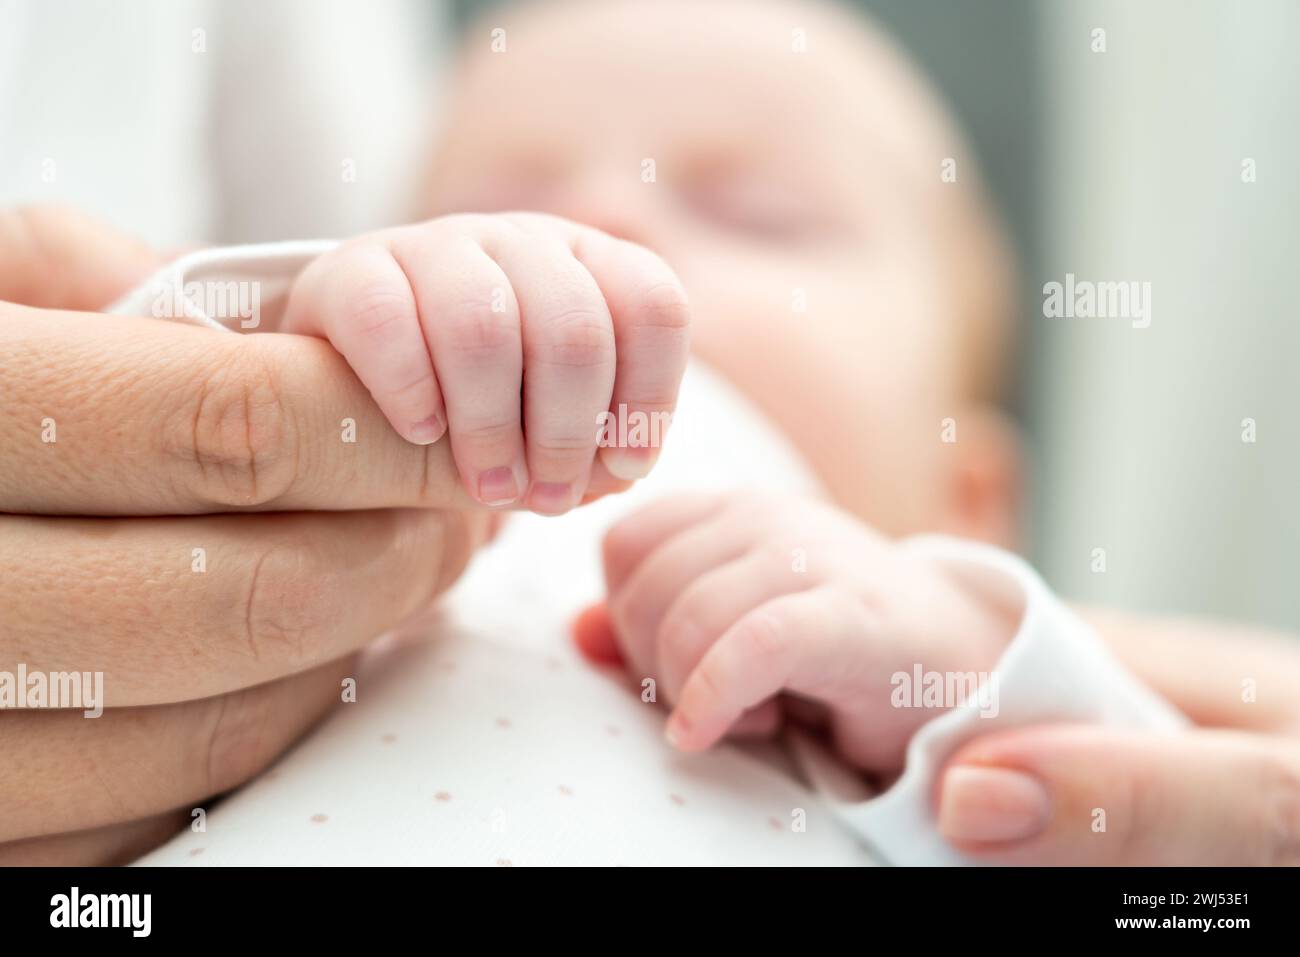 Mother's hand cradled by baby's tiny fingers. Concept of unconditional love from first touch Stock Photo